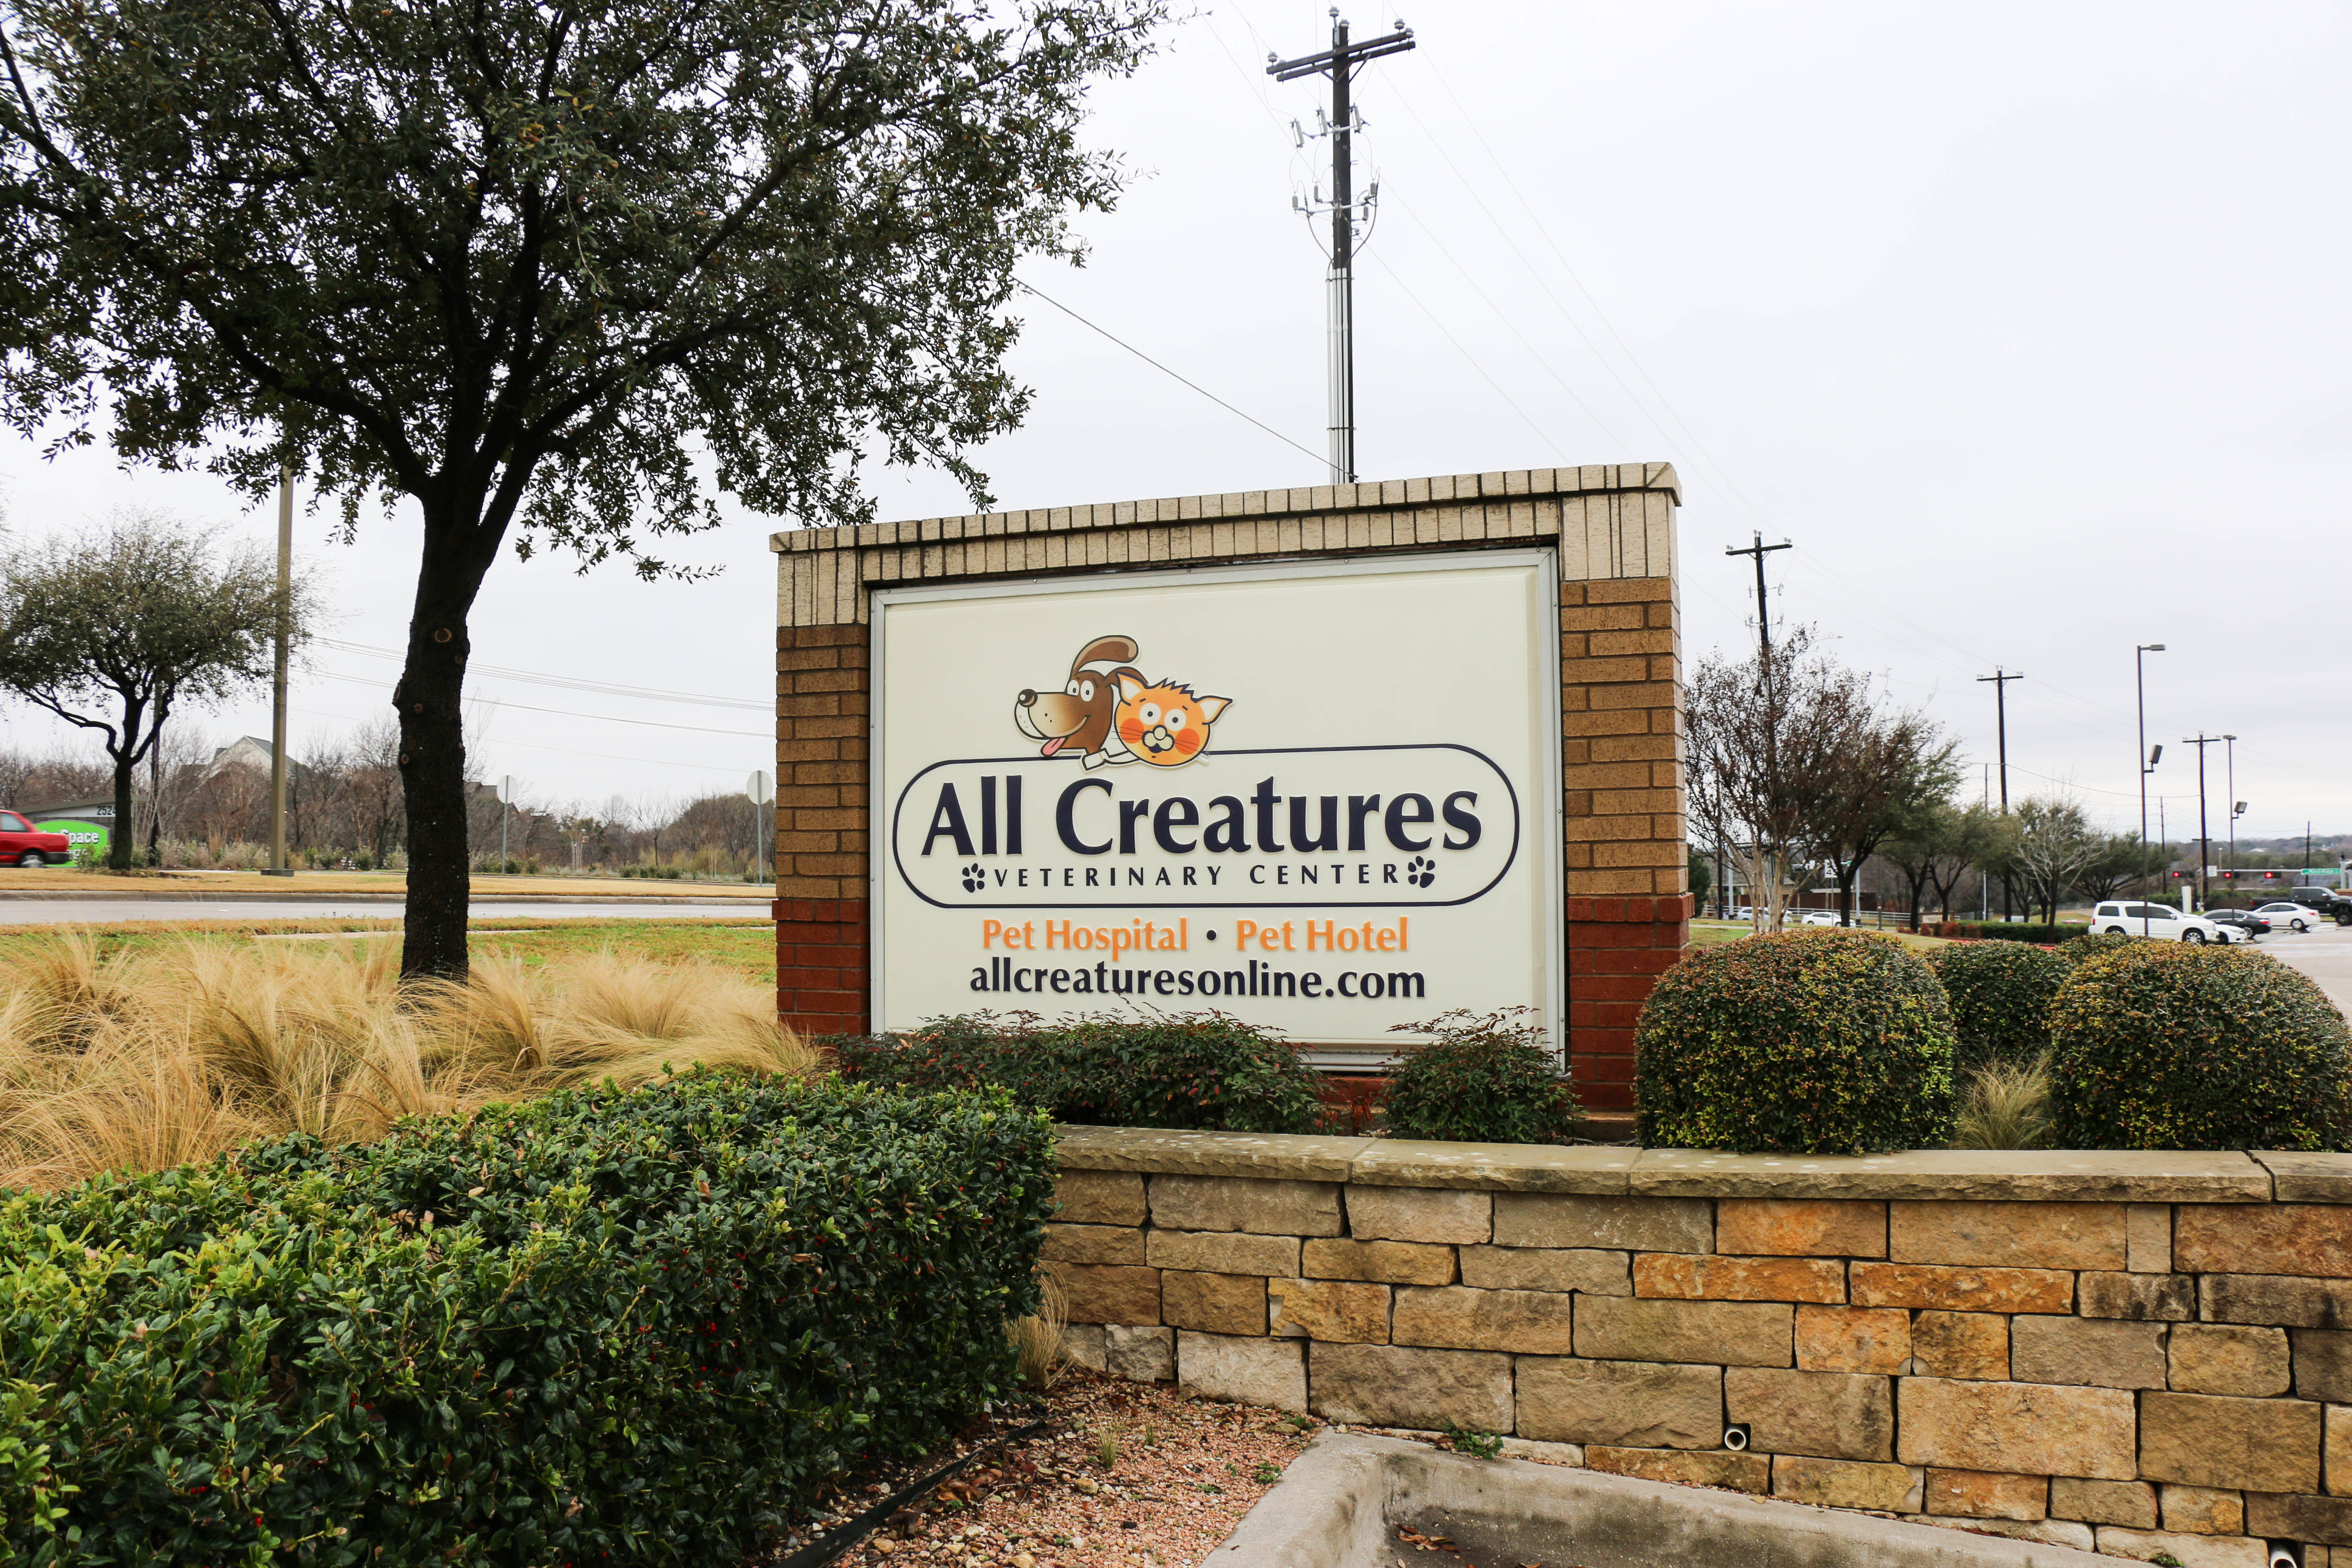 You know you’ve arrived to All Creatures when you see this sign on Hebron Pkwy in Carrollton, TX.